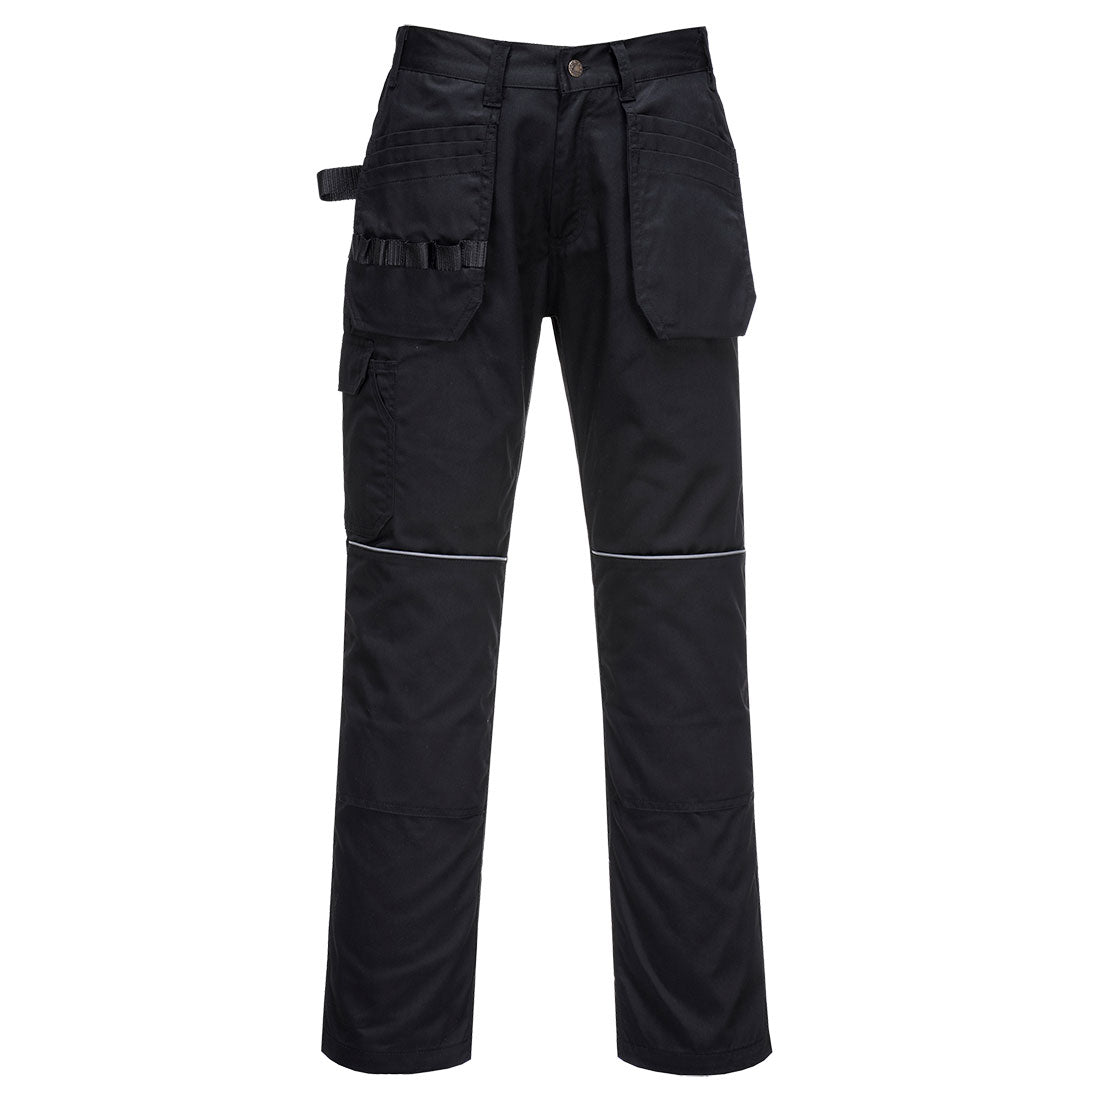 Portwest C720 Tradesman Holster Trousers for Holster Pocket Collection